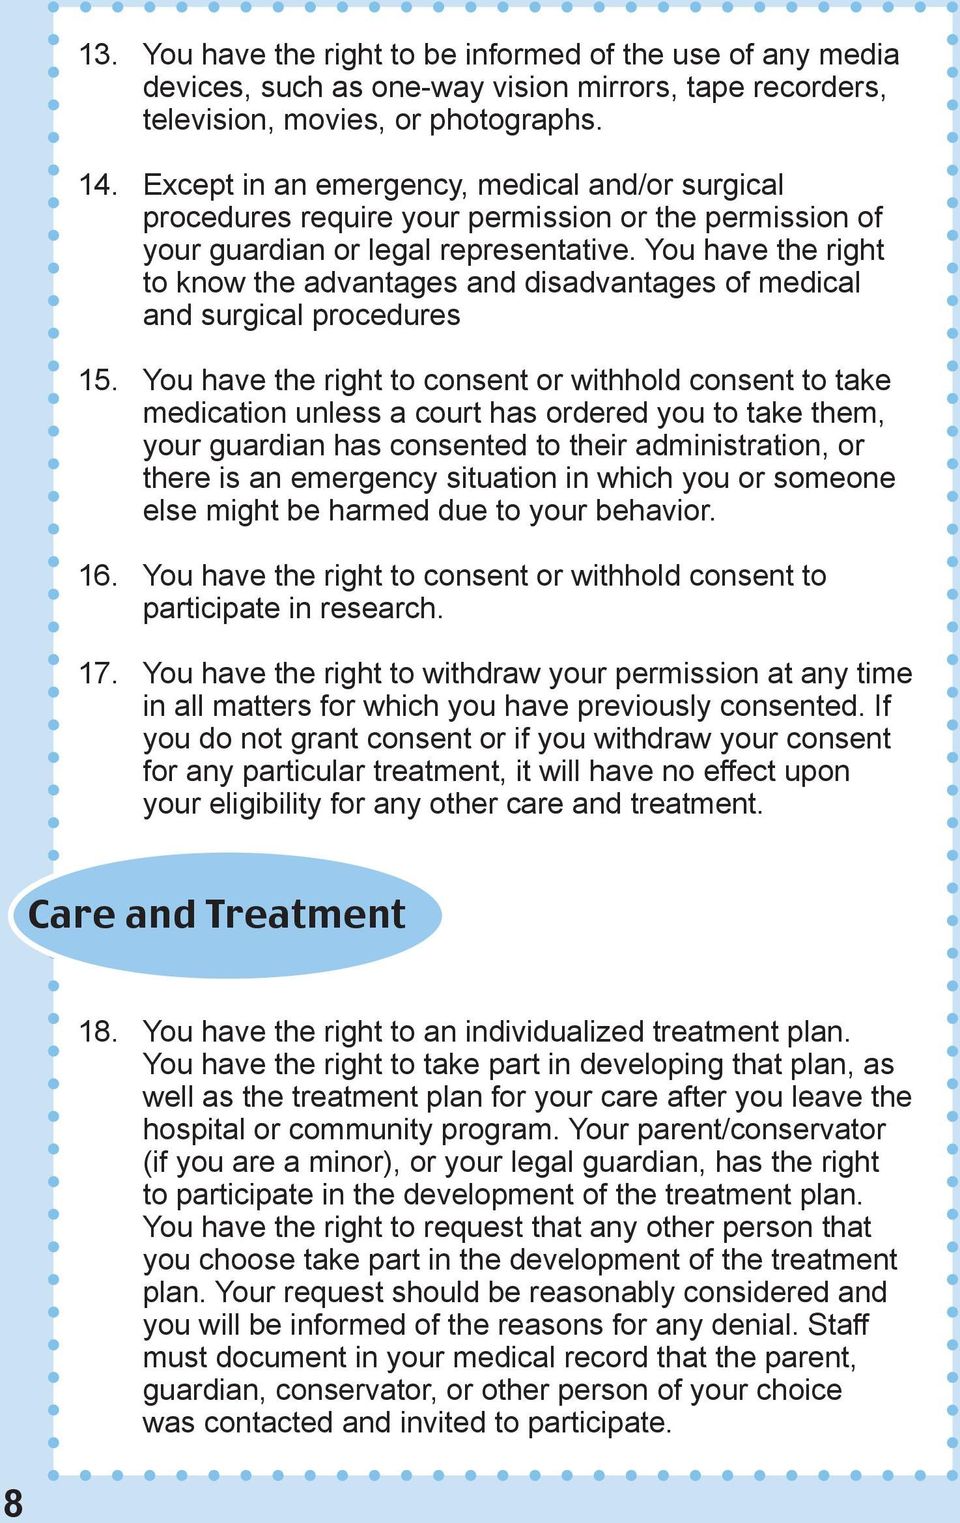 You have the right to know the advantages and disadvantages of medical and surgical procedures 15.